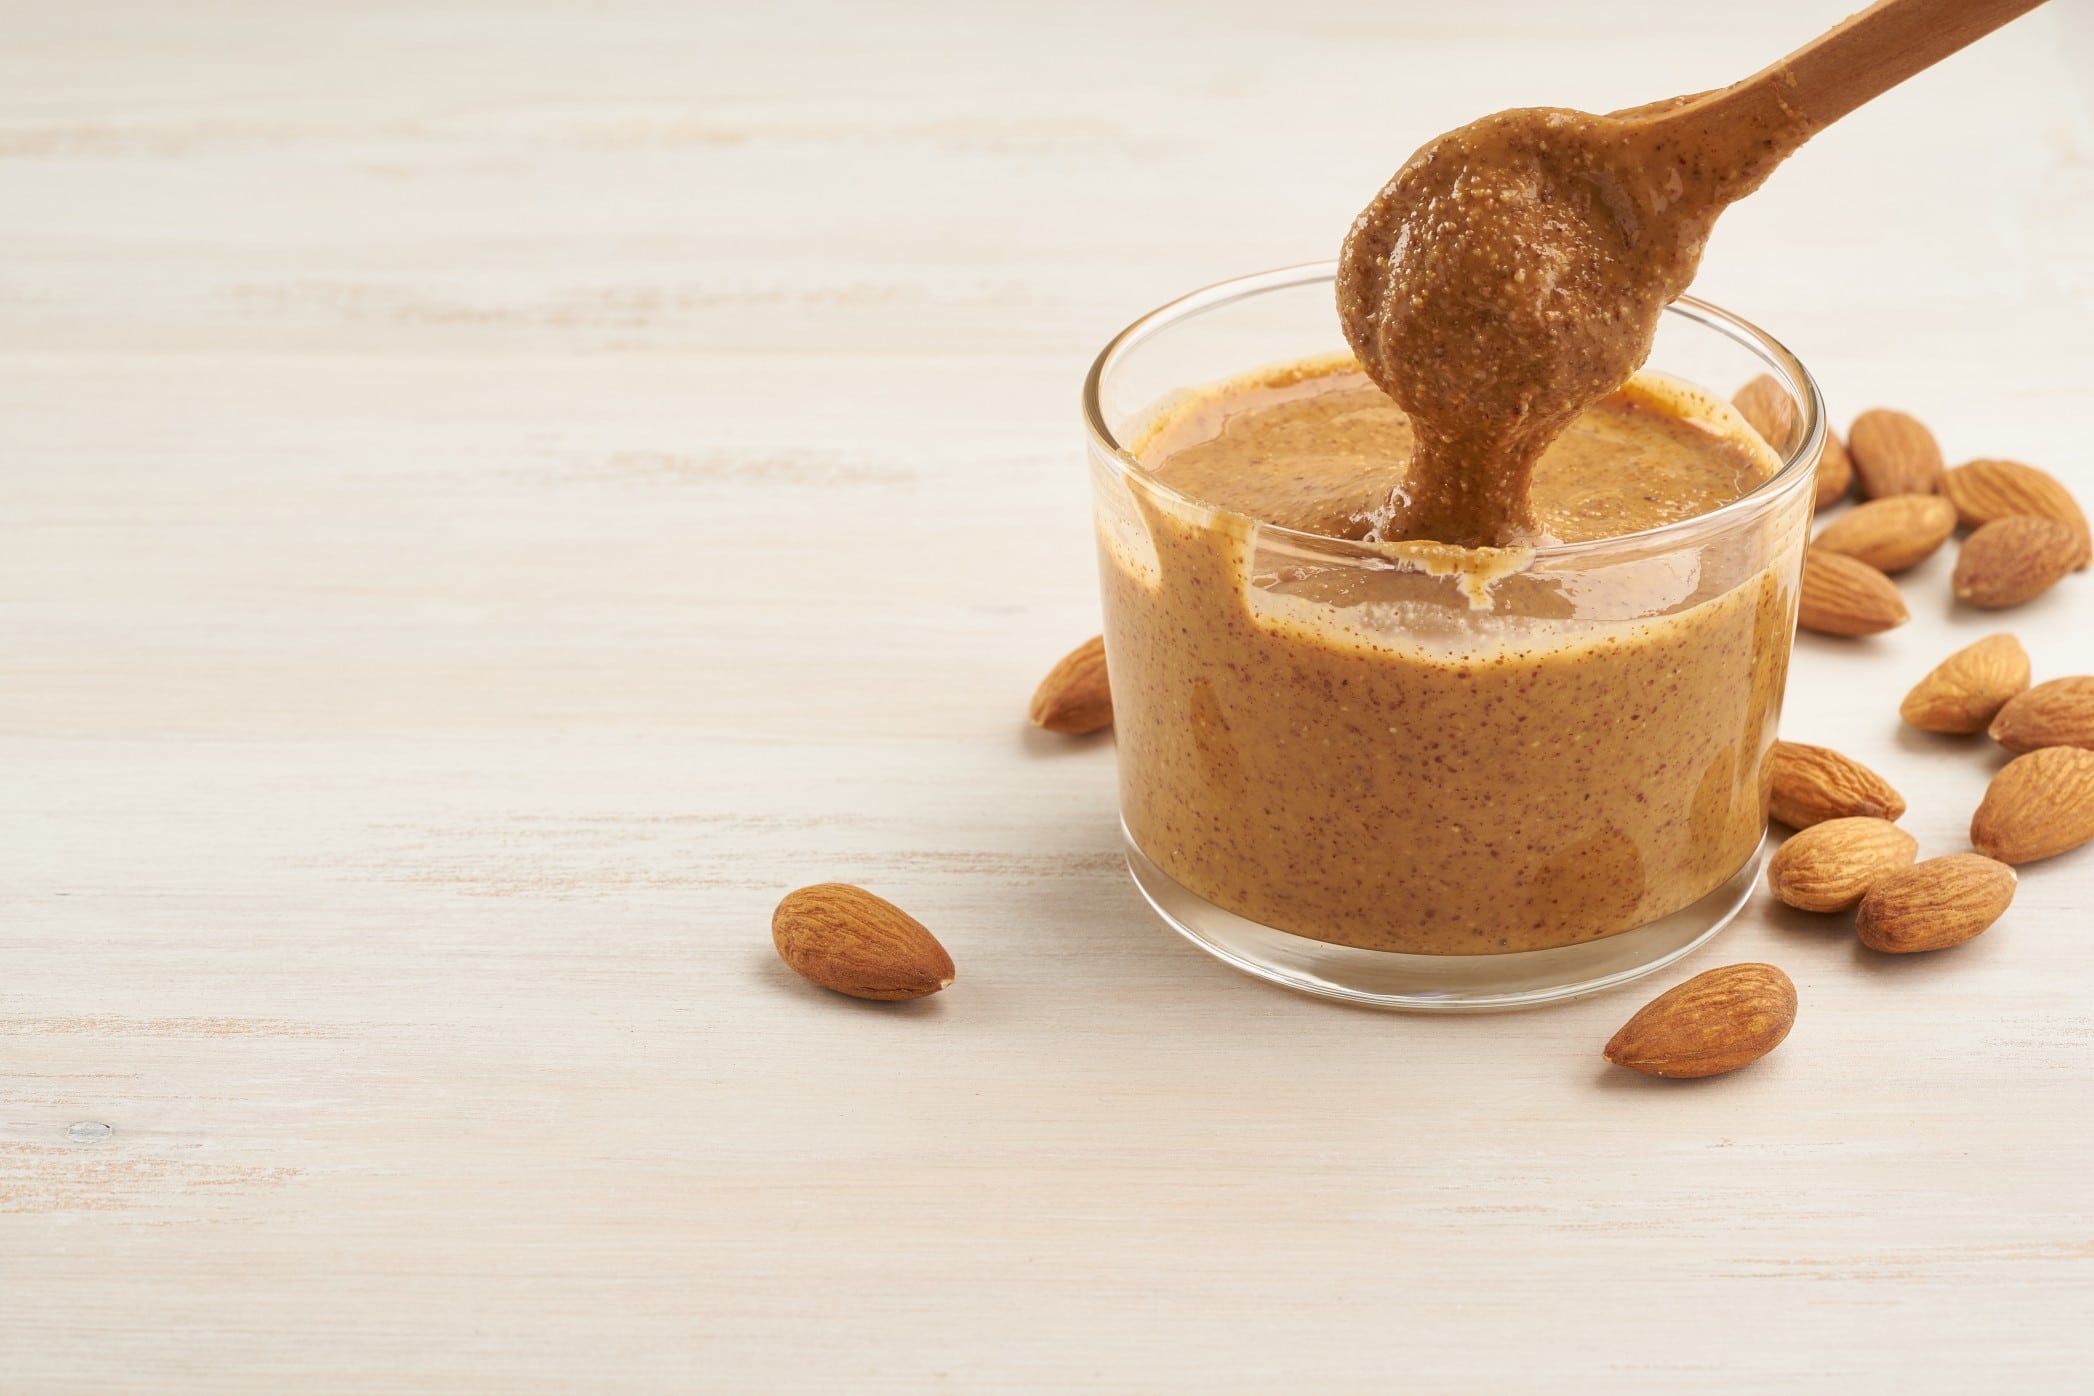 Does Almond Butter Go Bad?